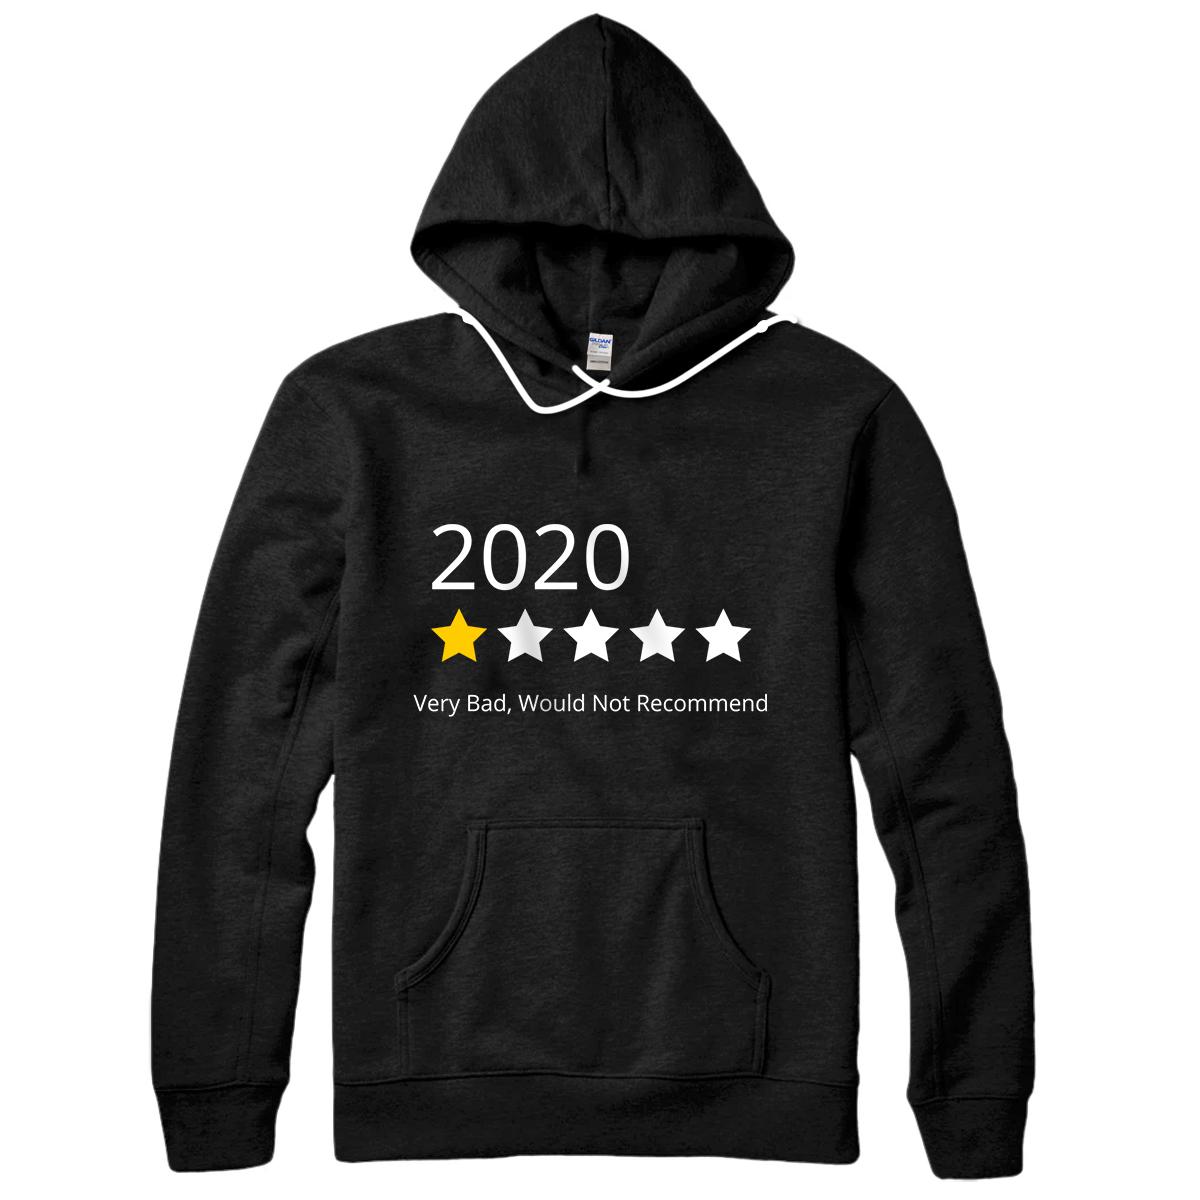 Personalized 1 star review 2020 Very Bad Would Not Recommend Pullover Hoodie